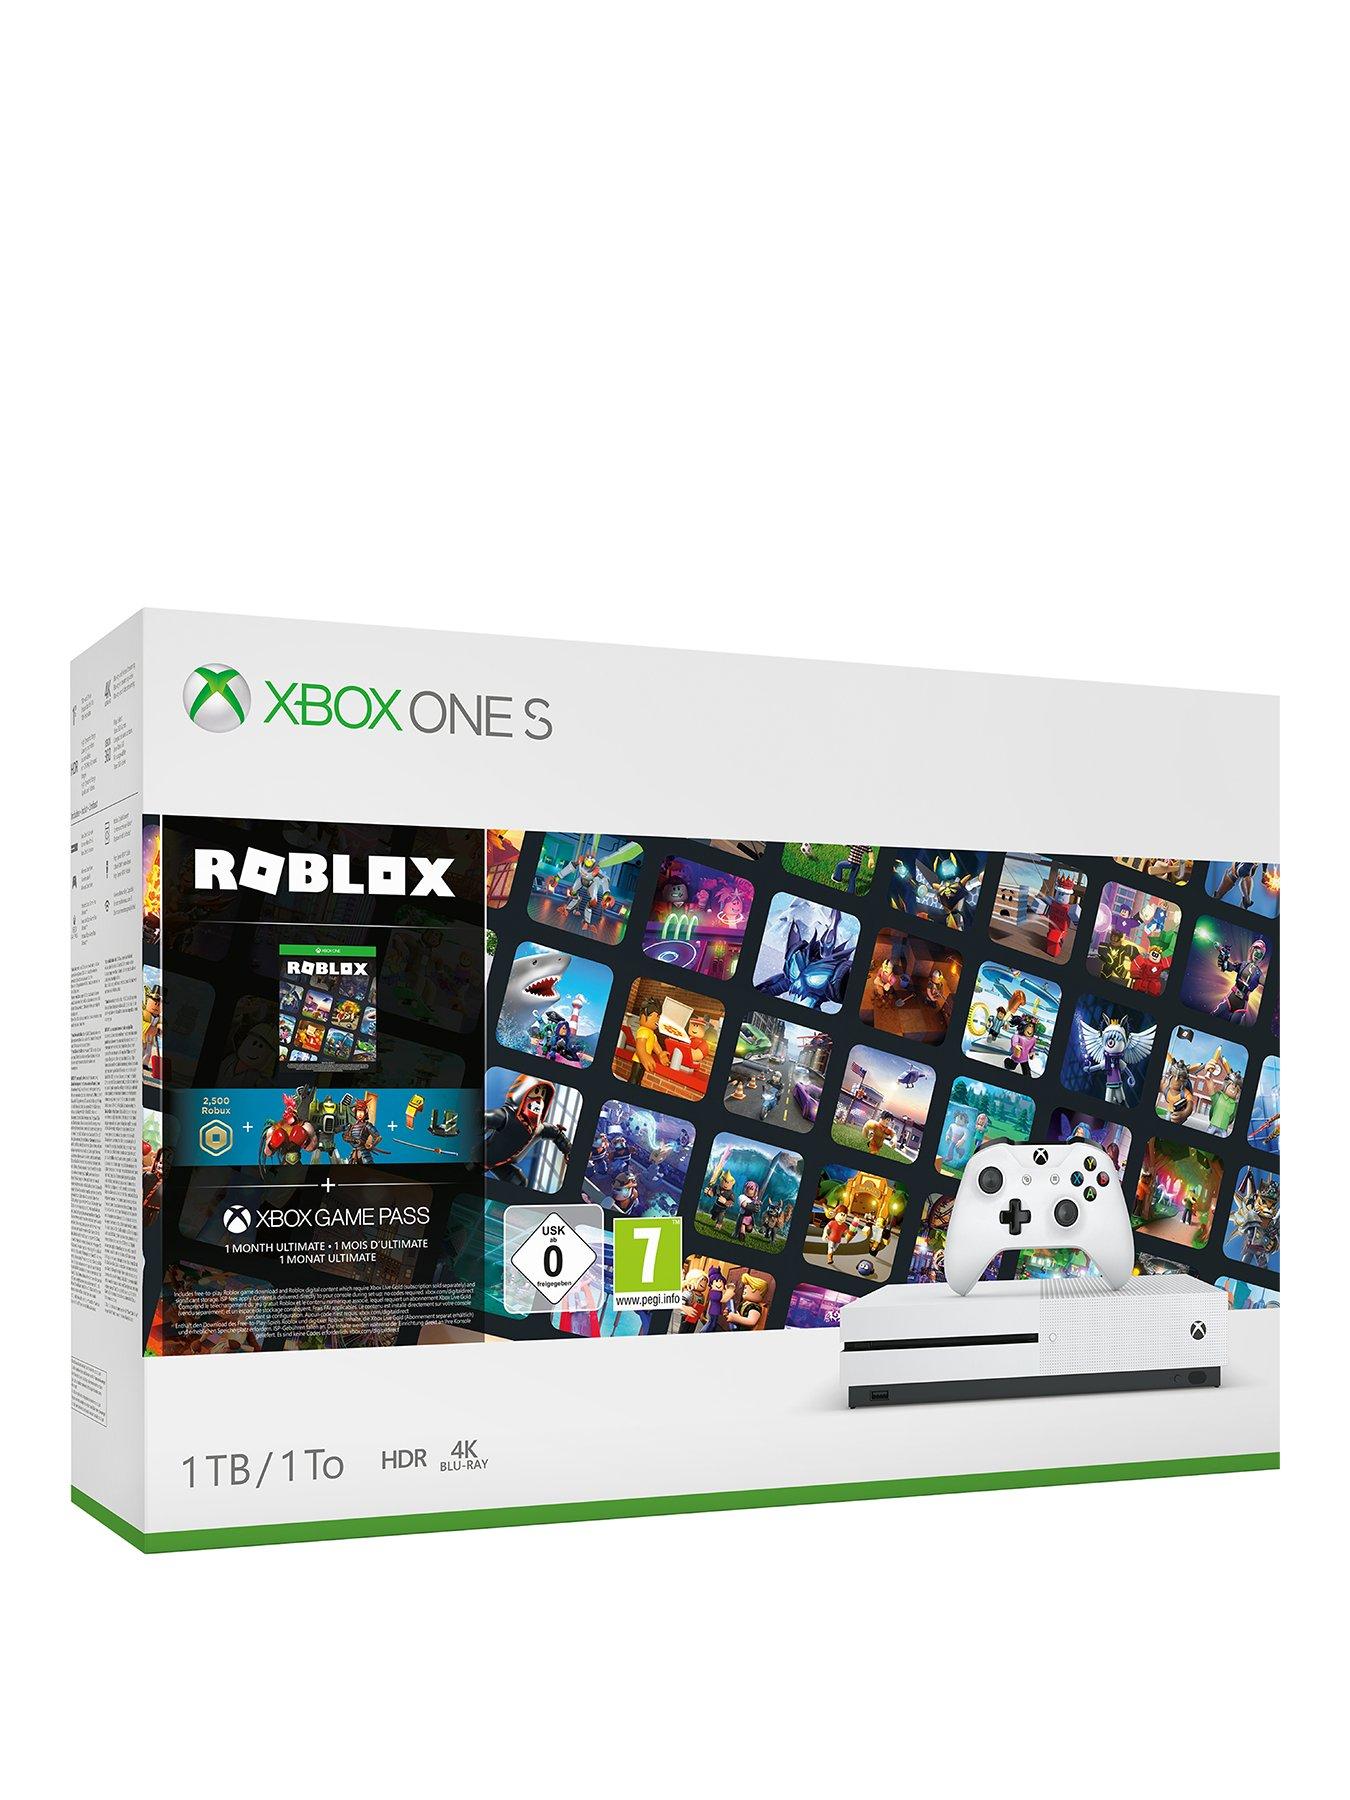 Xbox One S With Roblox Bundle And Optional Extras 1tb Console White Littlewoodsireland Ie - bunny ears of caprice roblox code